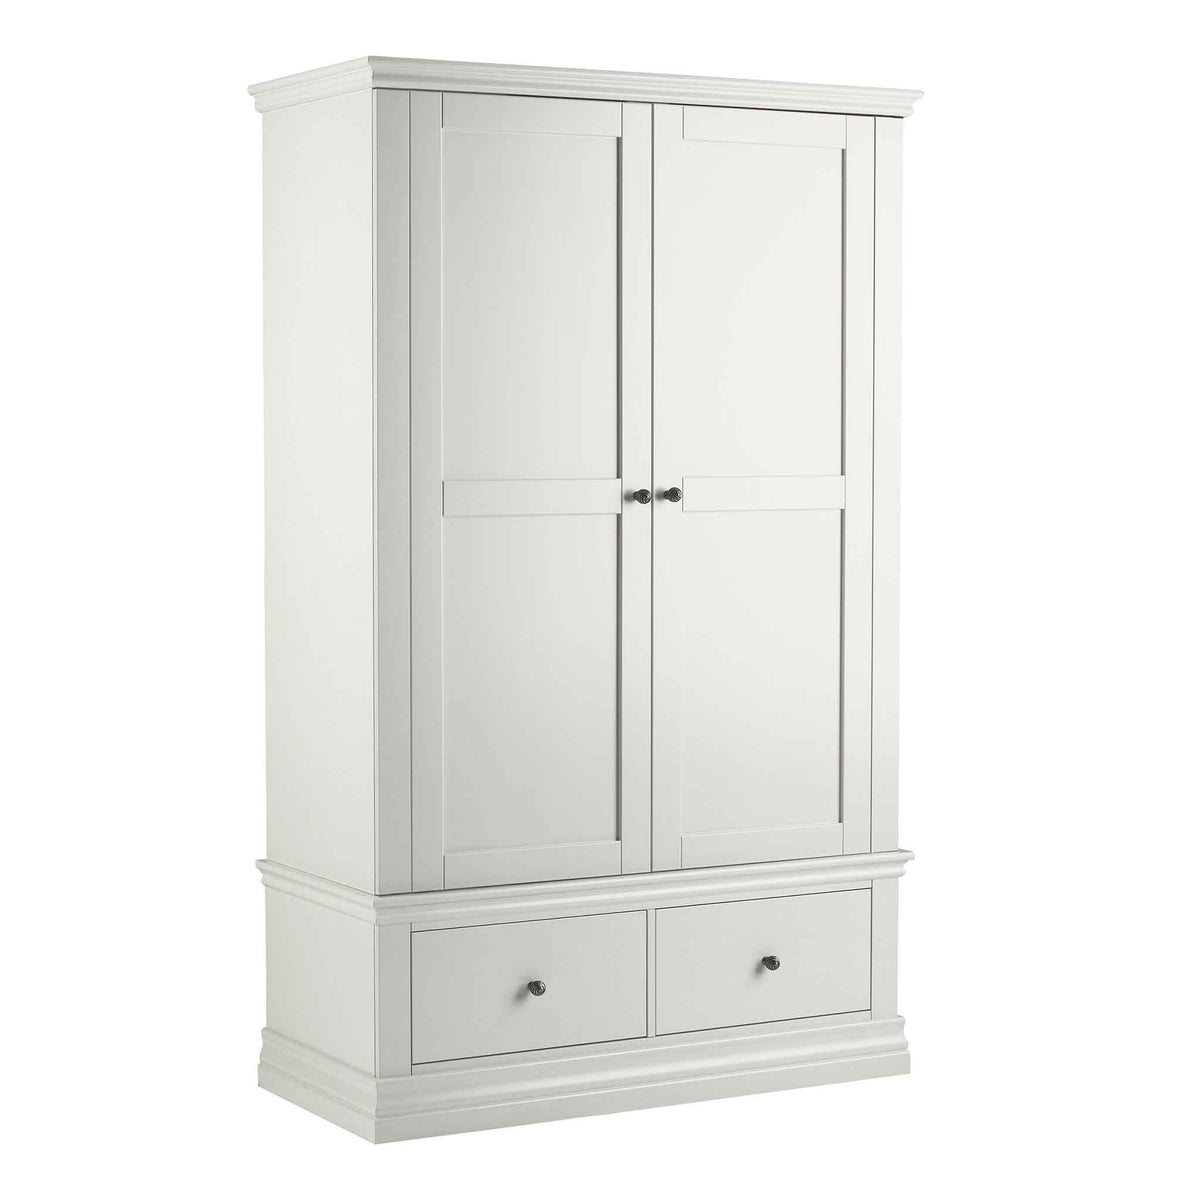 Melrose White Double Wardrobe with Drawers from Roseland Furniture